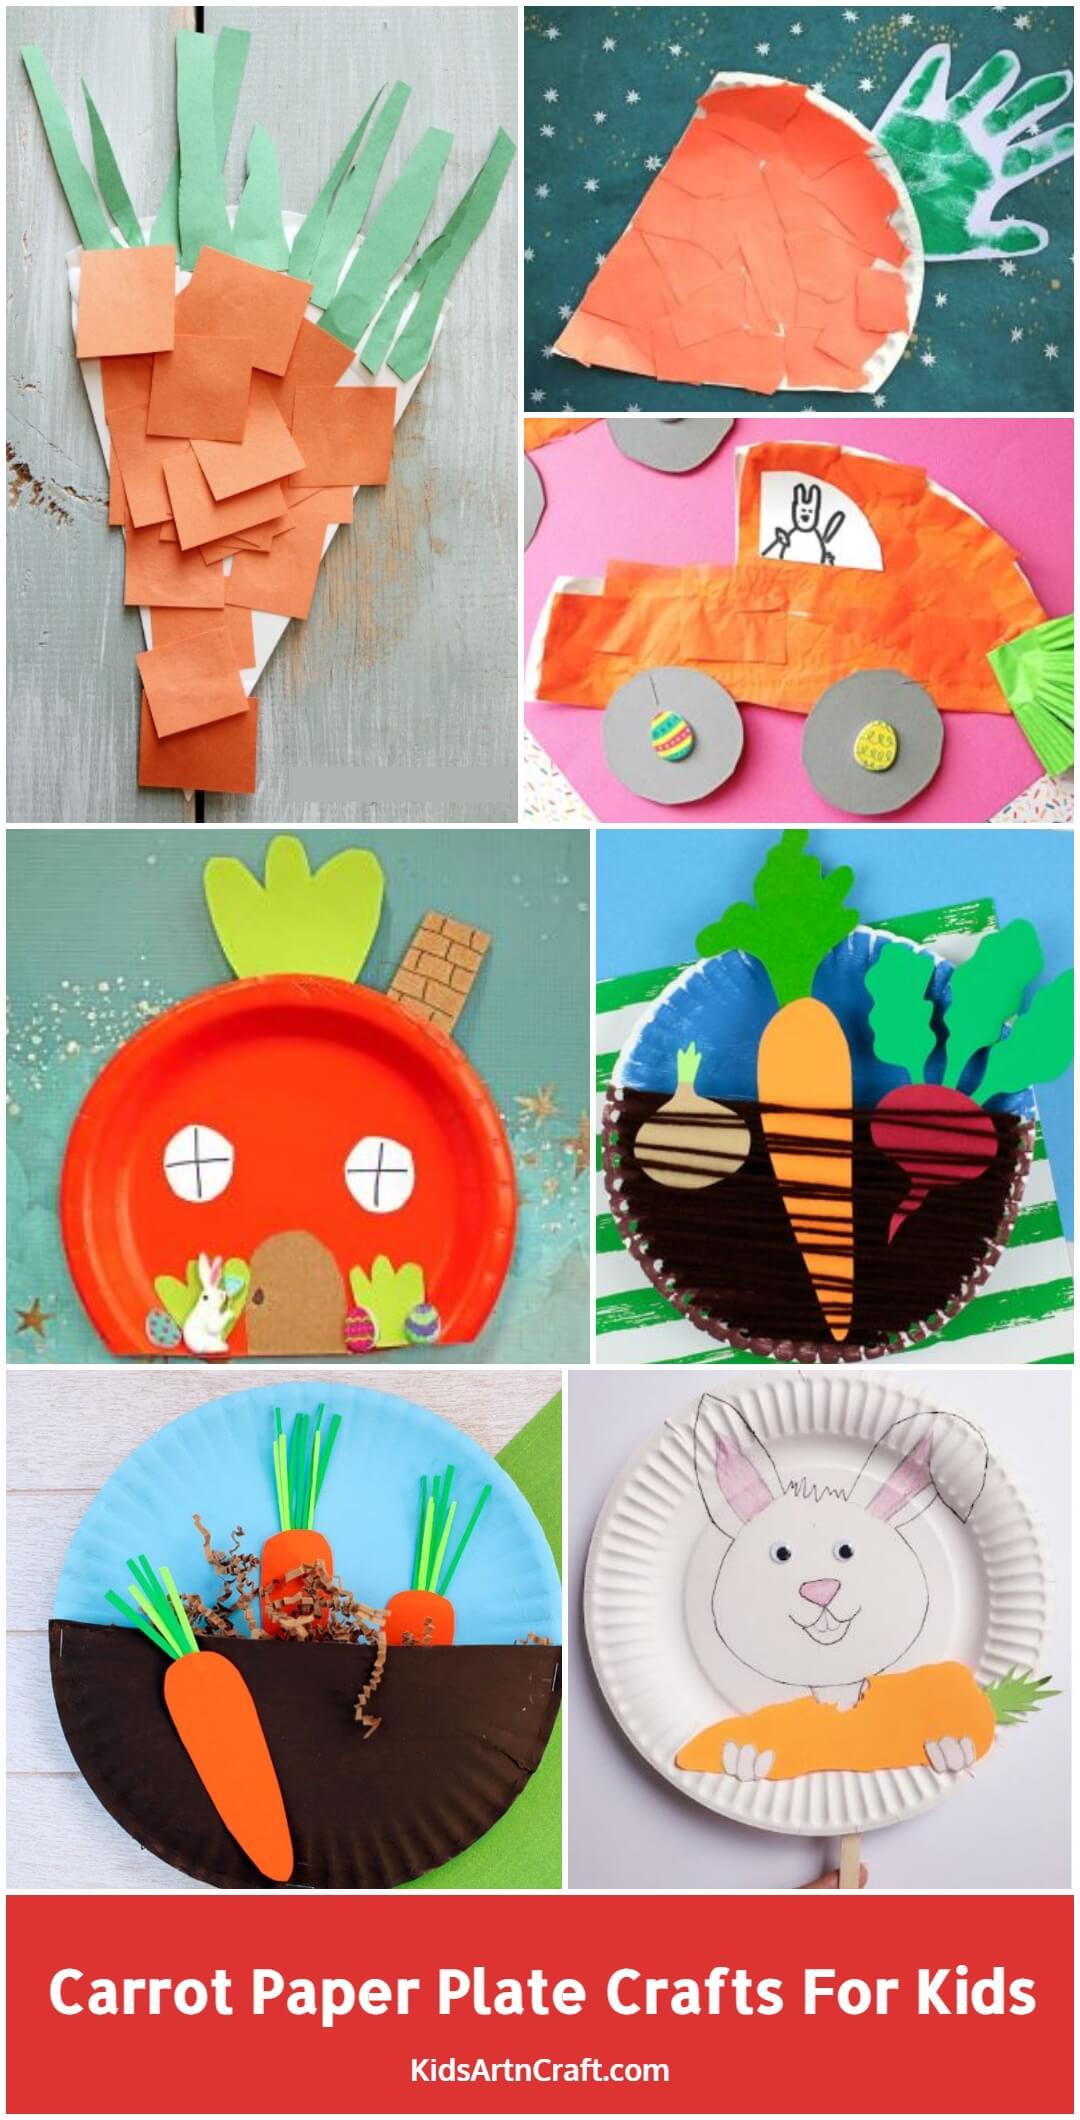 Carrot Paper Plate Crafts For Kids